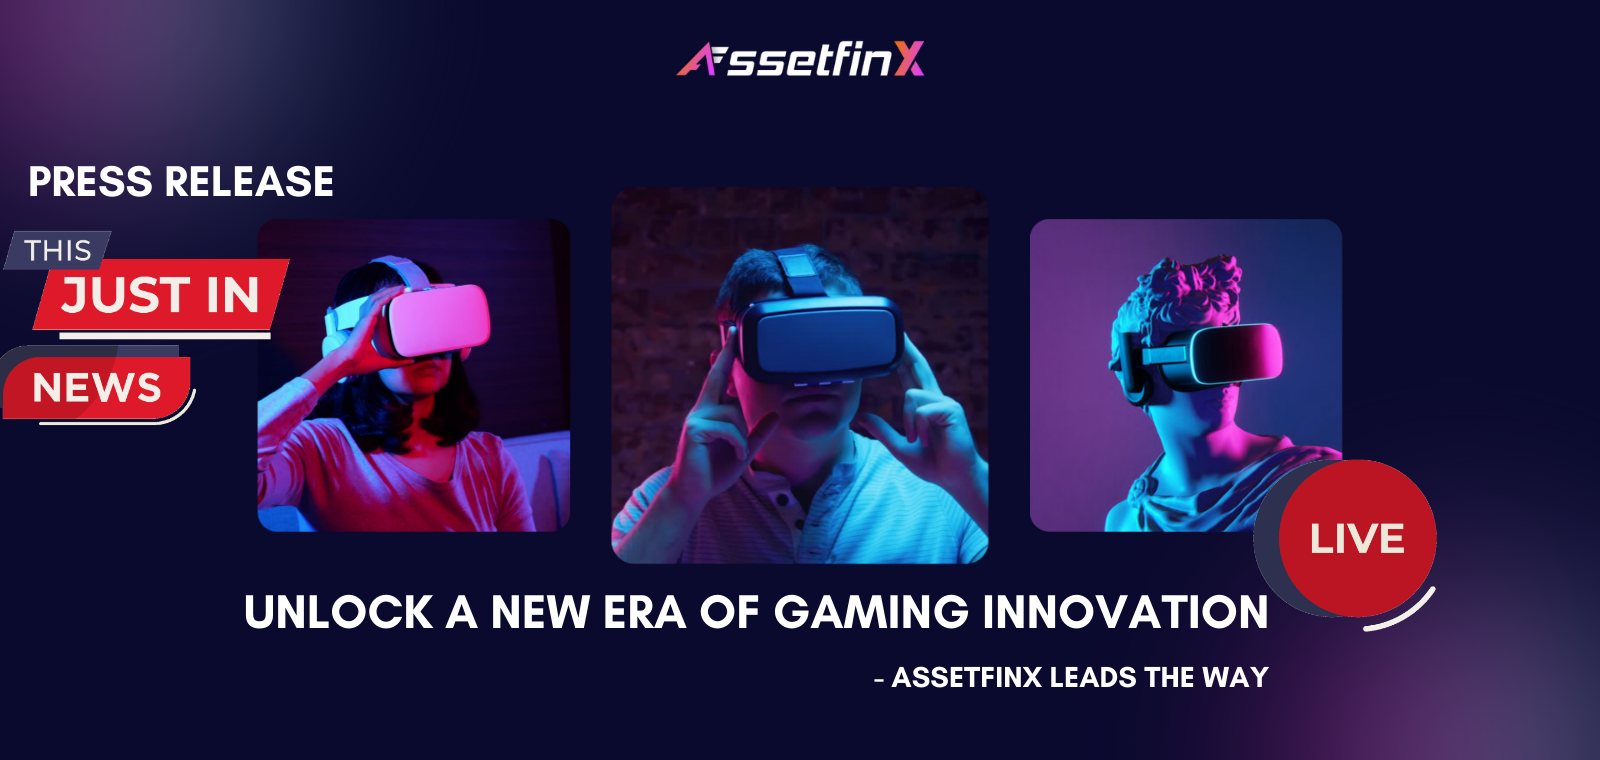 Unlocking a New Era of Gaming Innovation: AssetfinX Leads the Way